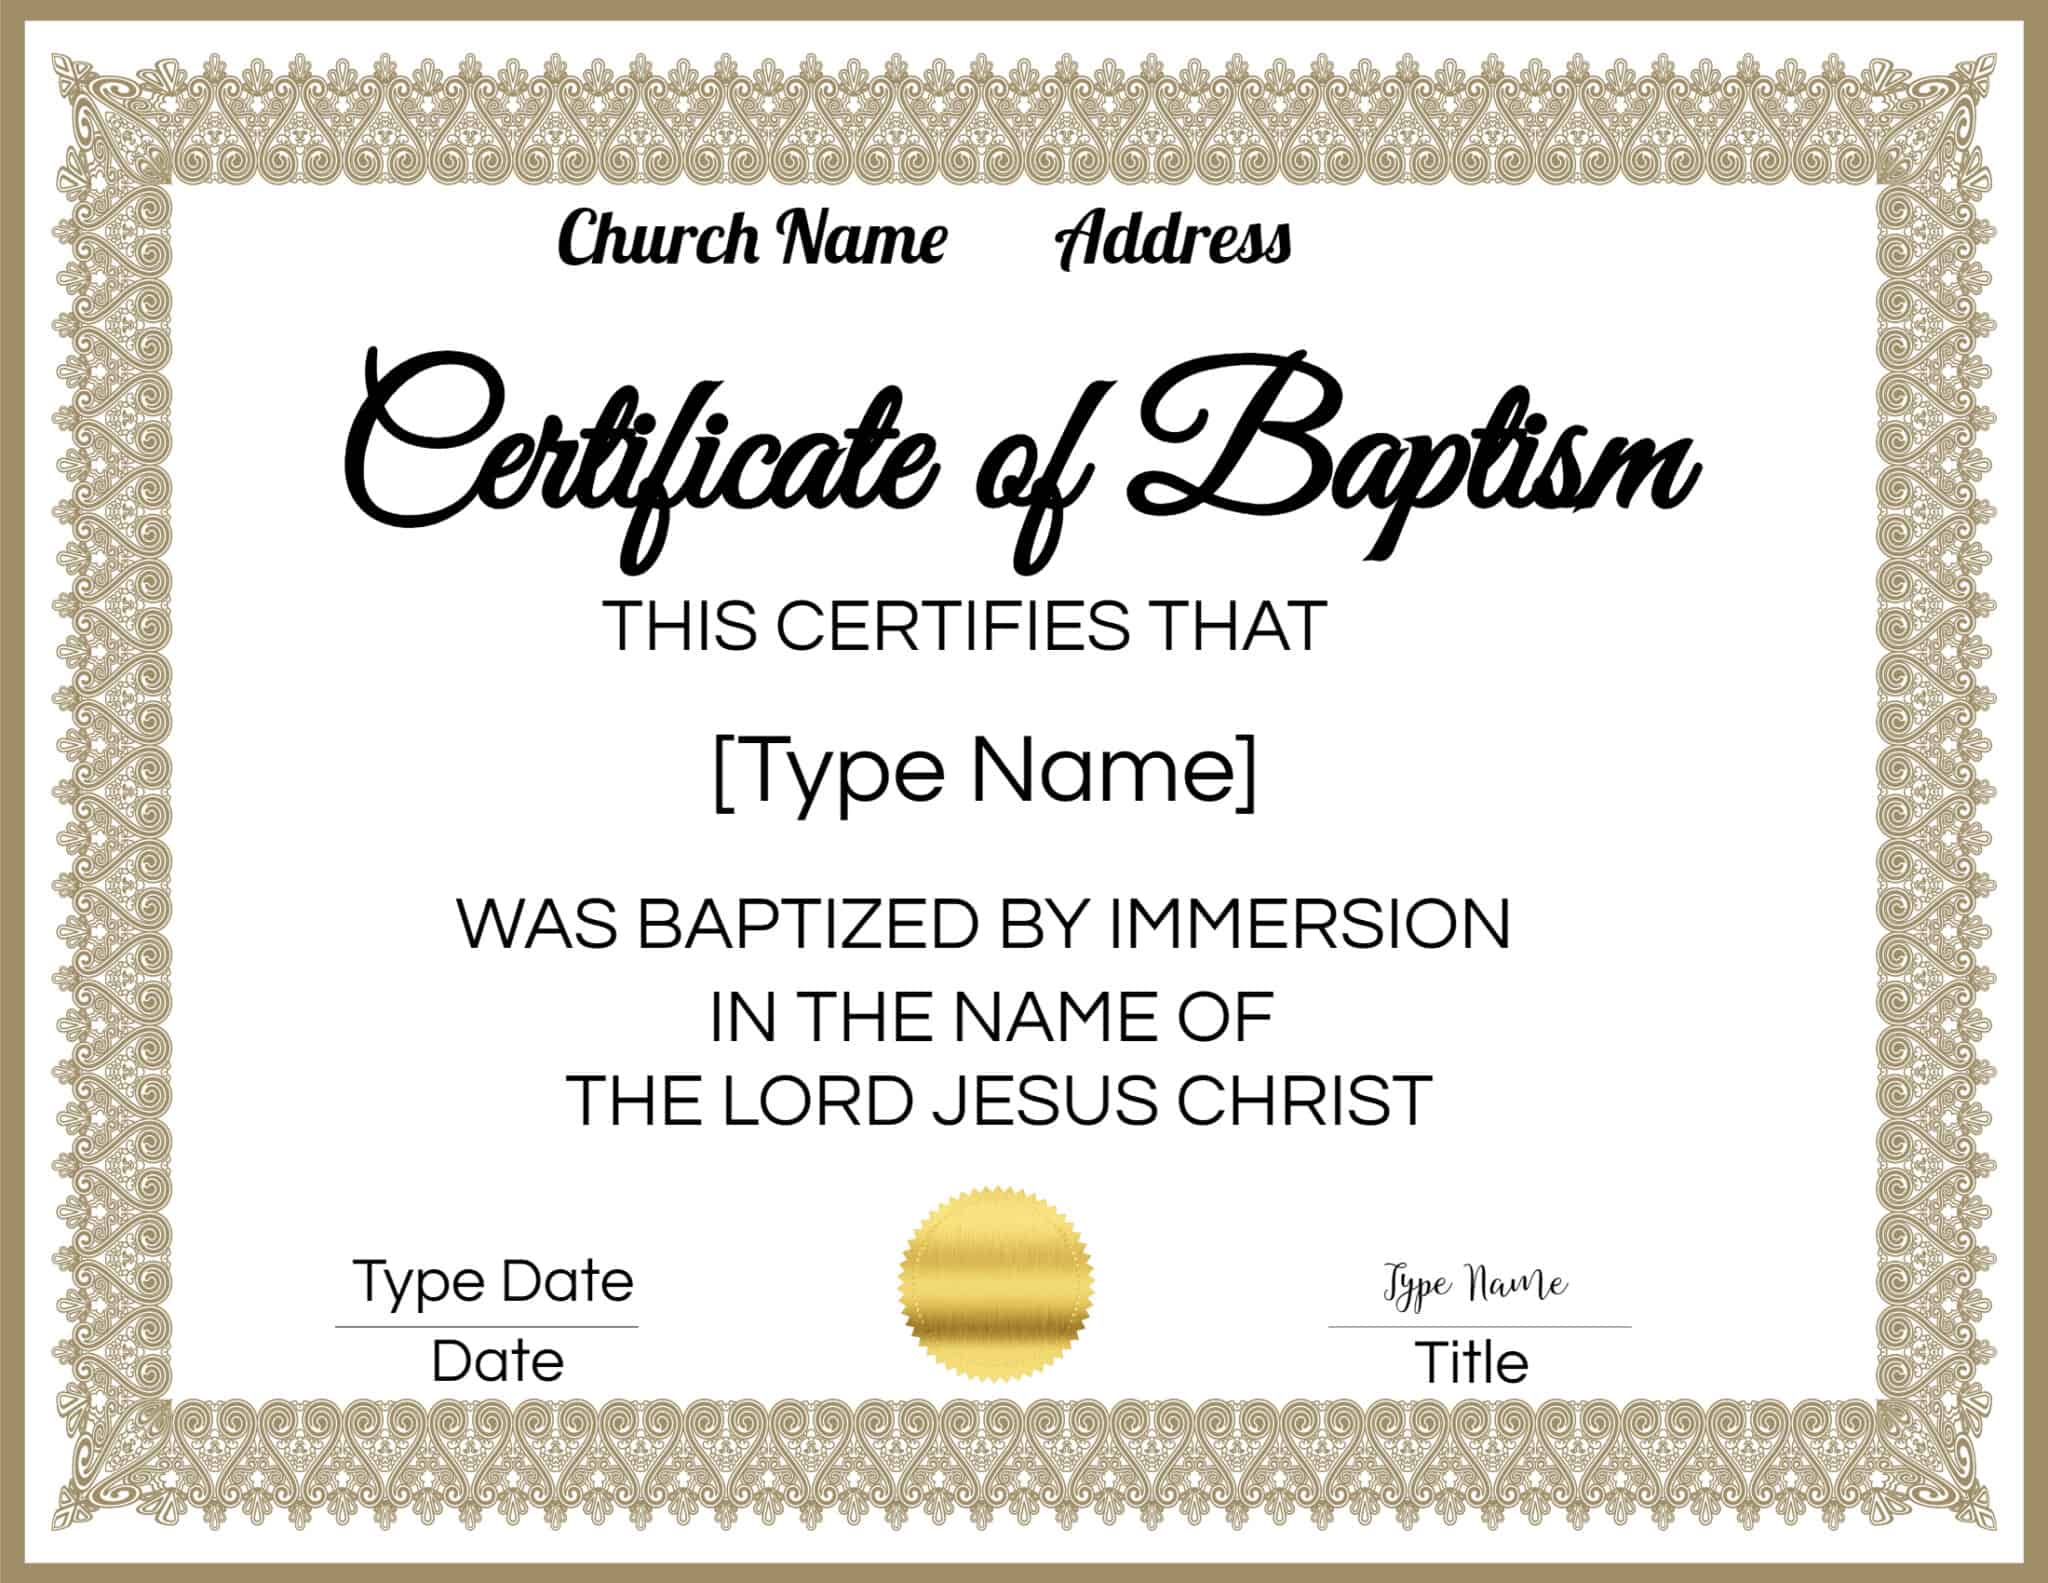 FREE Baptism Certificate Templates | Customize Online | No Watermark Blank Certificate Templates For Word Free